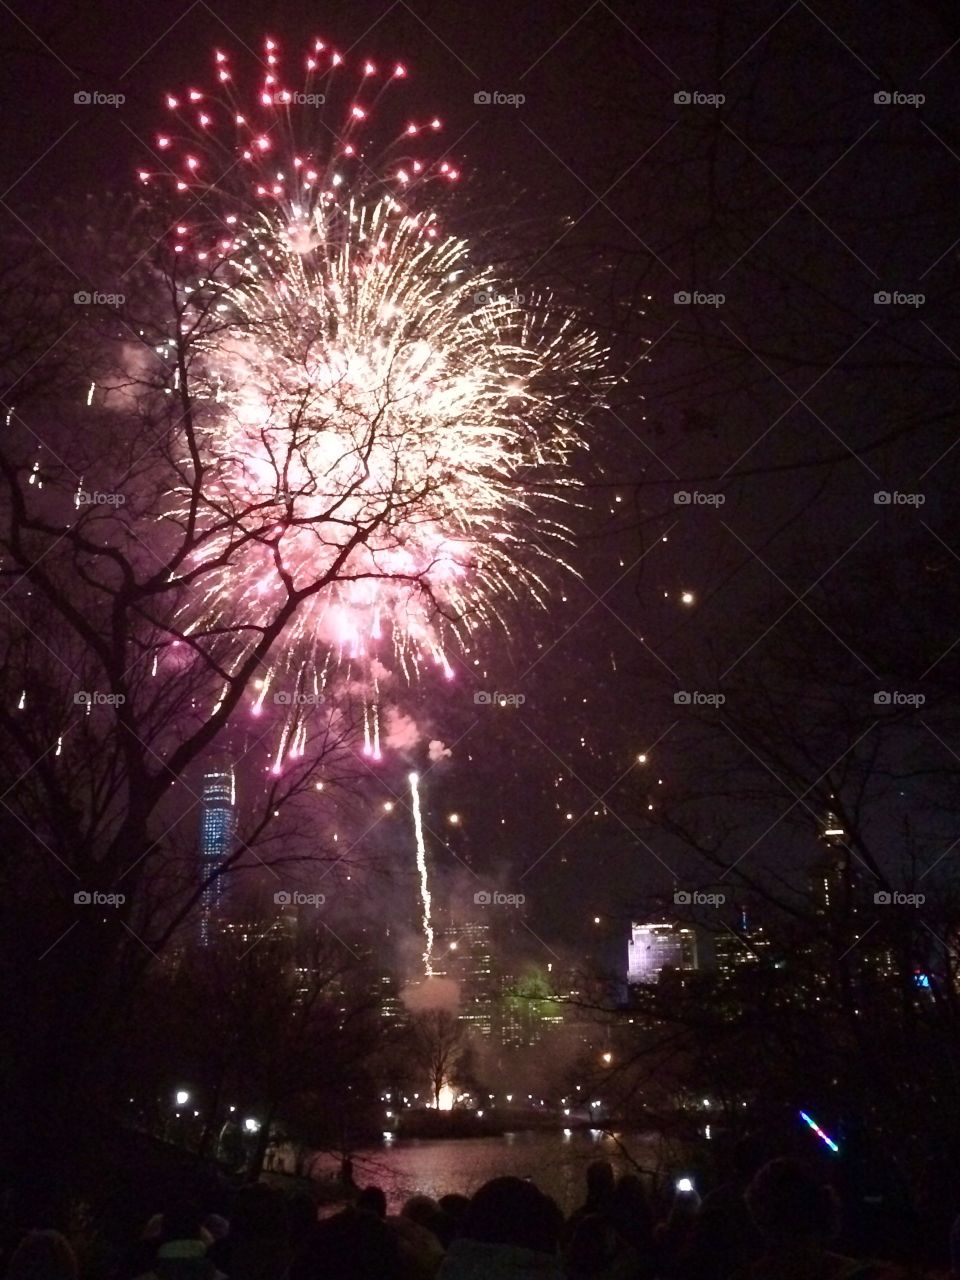 New Year's in Central Park. Fireworks are launcedh from New York's Central Park in celebration of the new year.